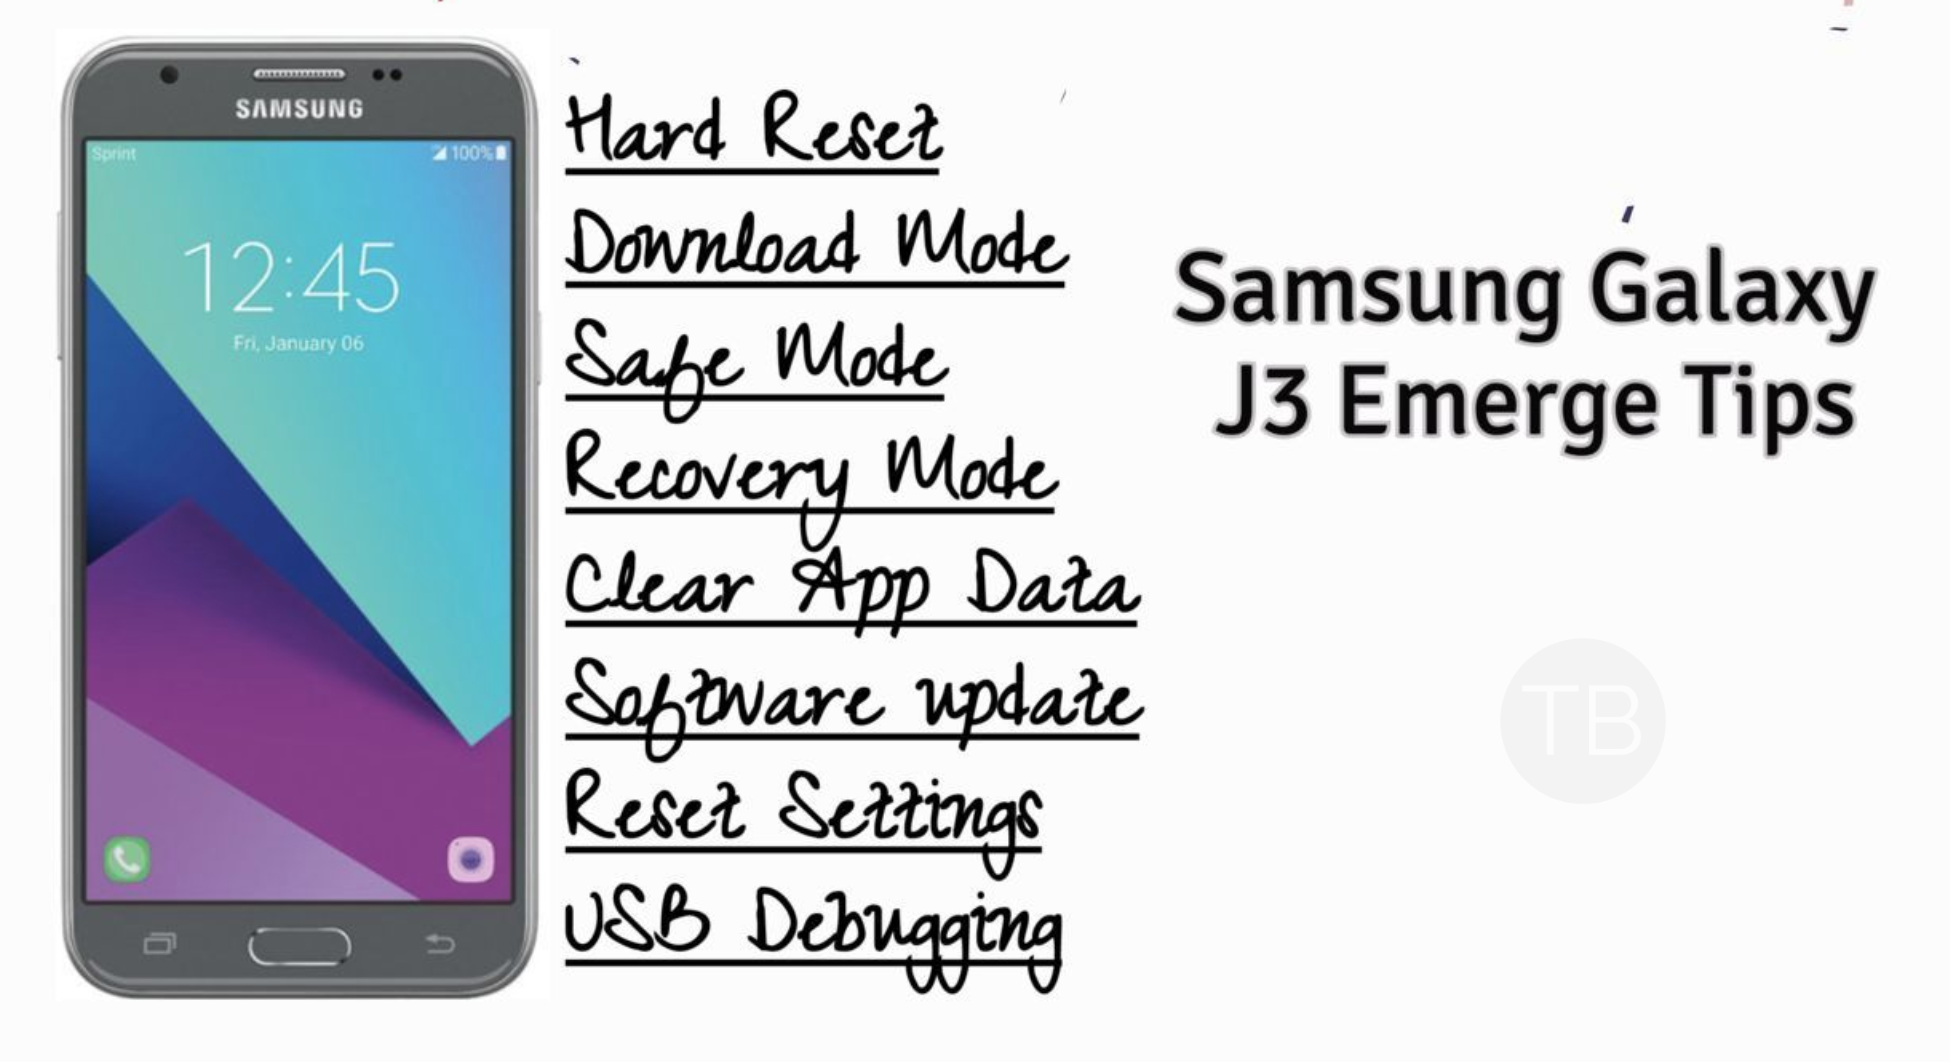 Samsung Galaxy Emerge Tips : Hard Reset, Recovery, Safe Mode, Download Mode & More. | TechBeasts